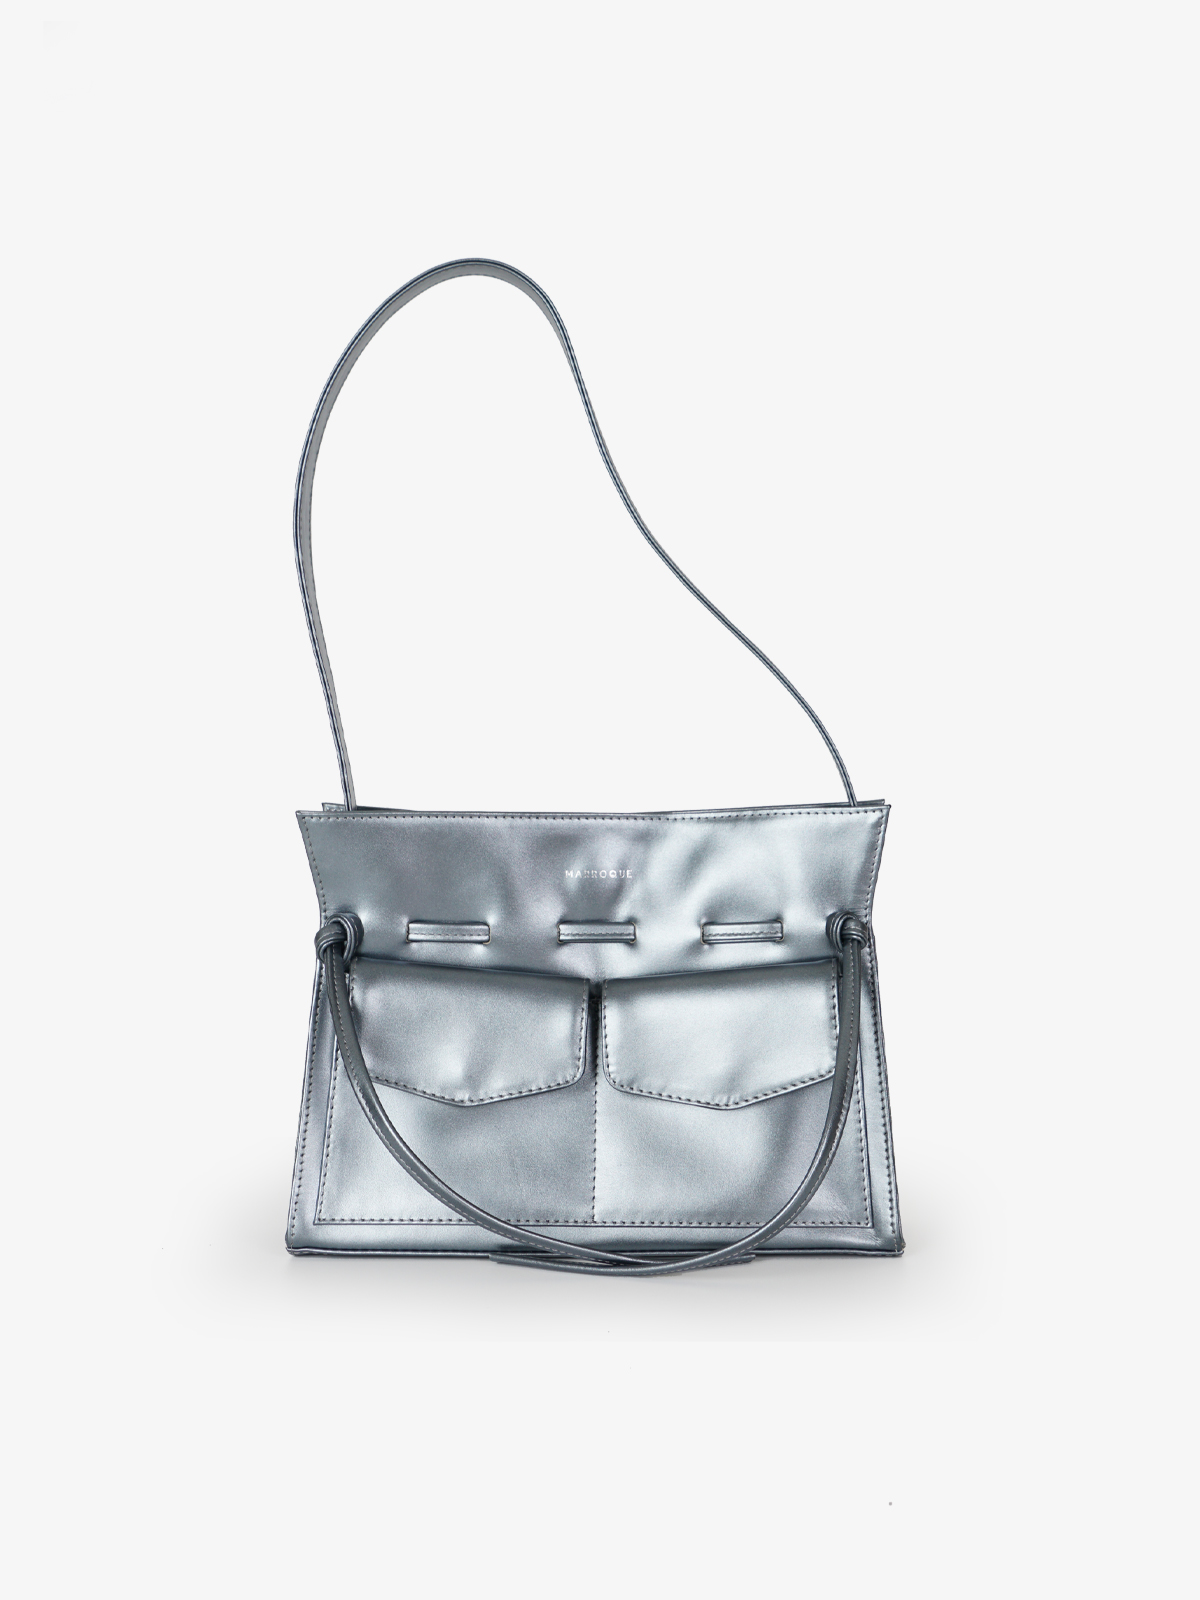 Marroque Judy Shoulder genuine leather bag in Silverblue.